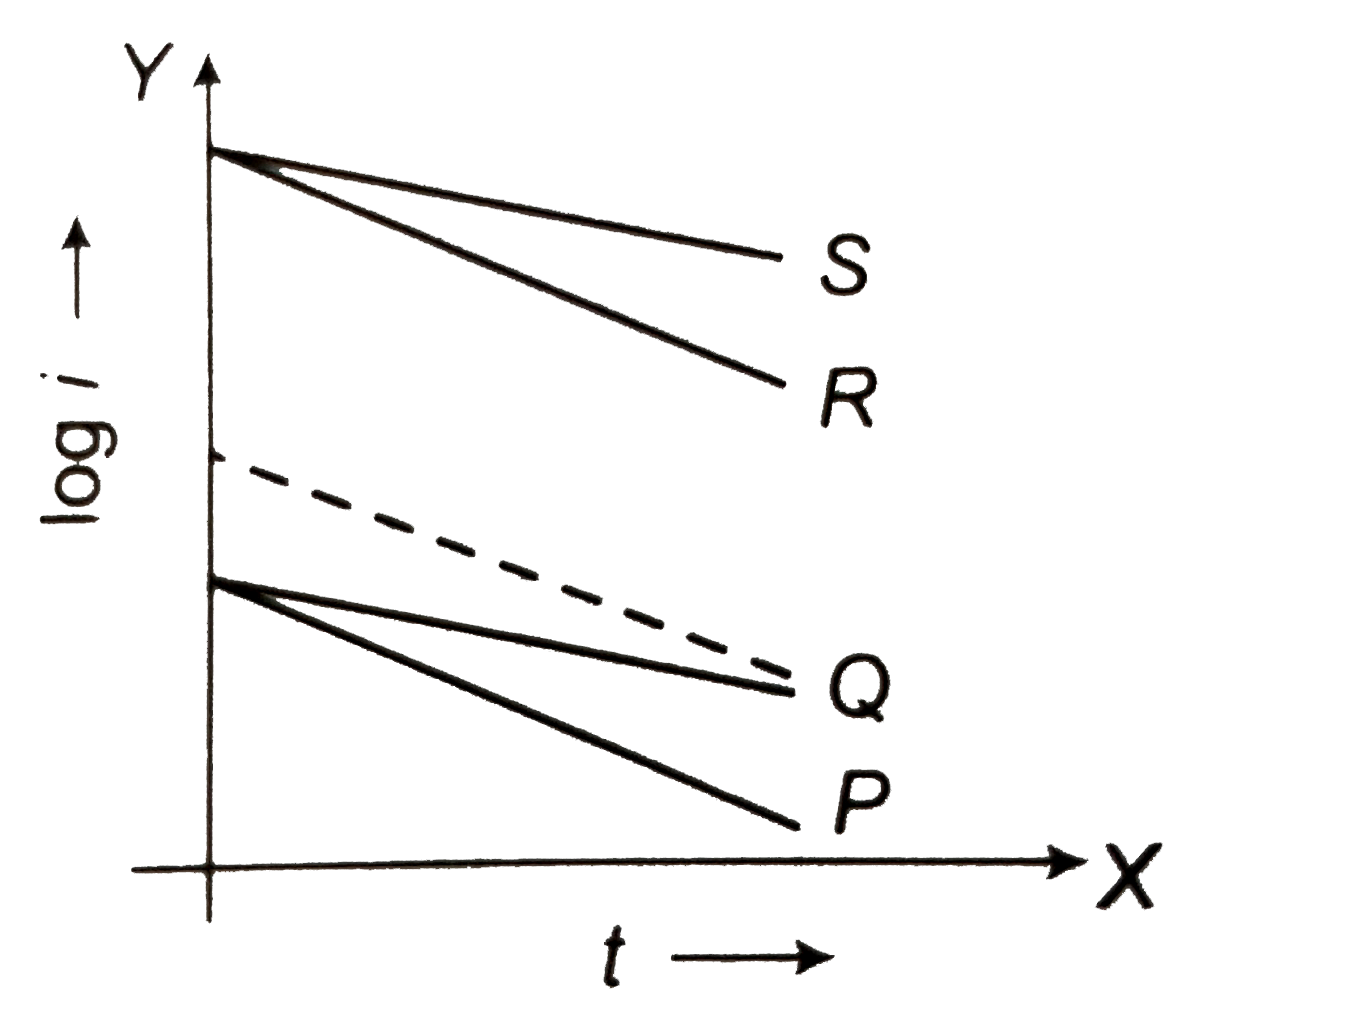 In an RC circuit while charging, the graph of 1n i versis time is as shown by the dotted line in the diagram figure. Where i is the current. When the value of the resistance is doubled, which of the solid curve best represents the variation of 1n i versus time